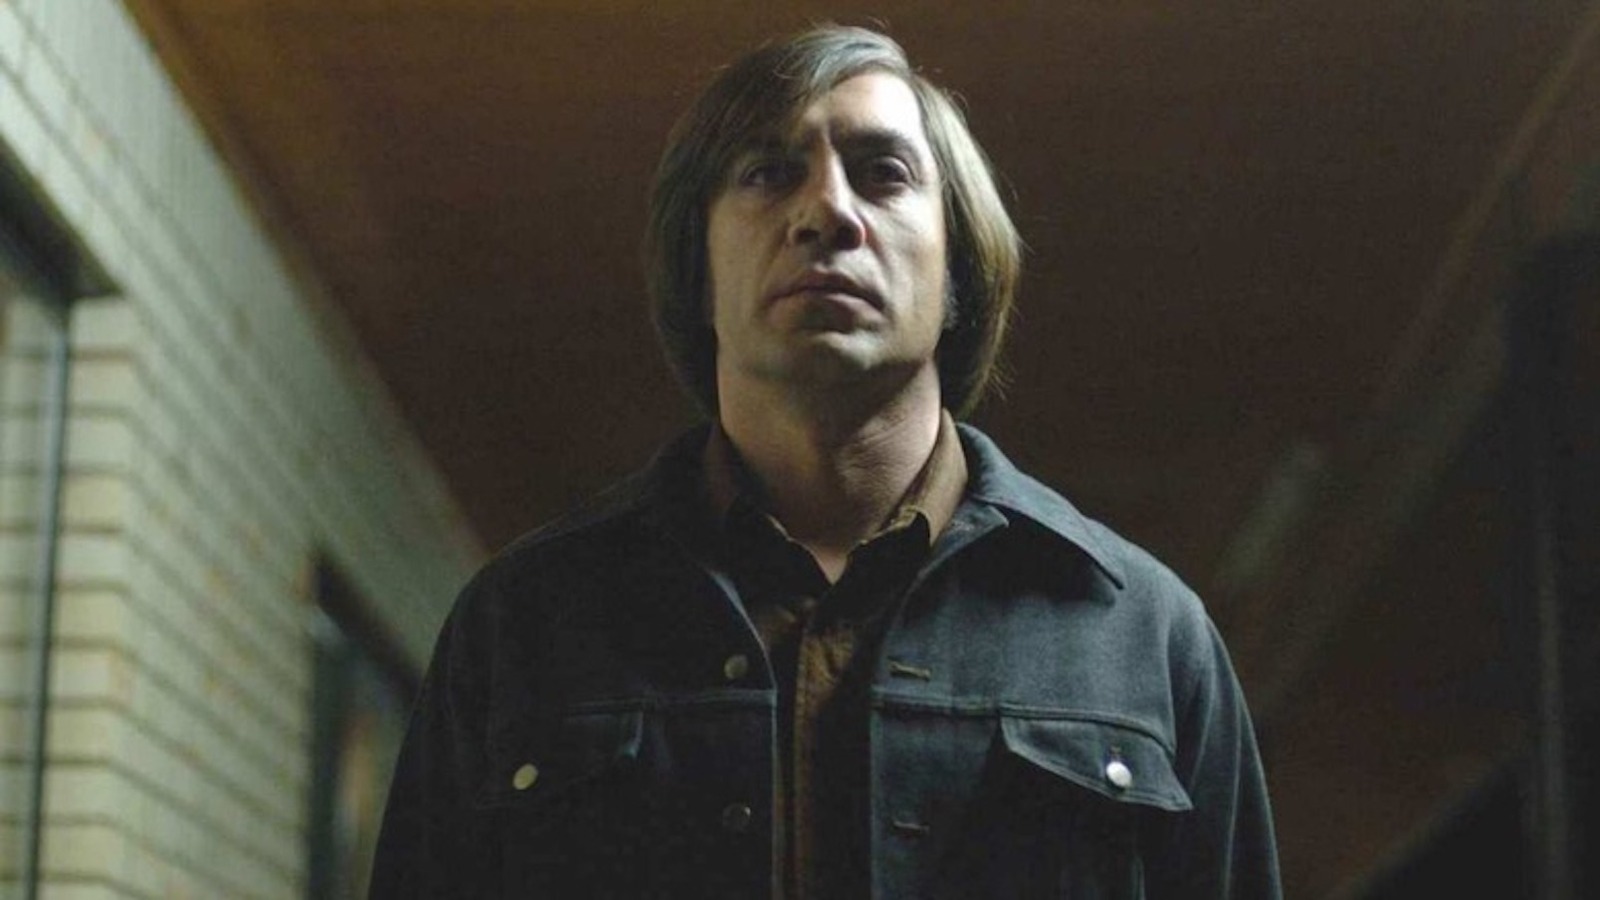 Javier Bardem made a dream come true with his No Country For Old Men cast